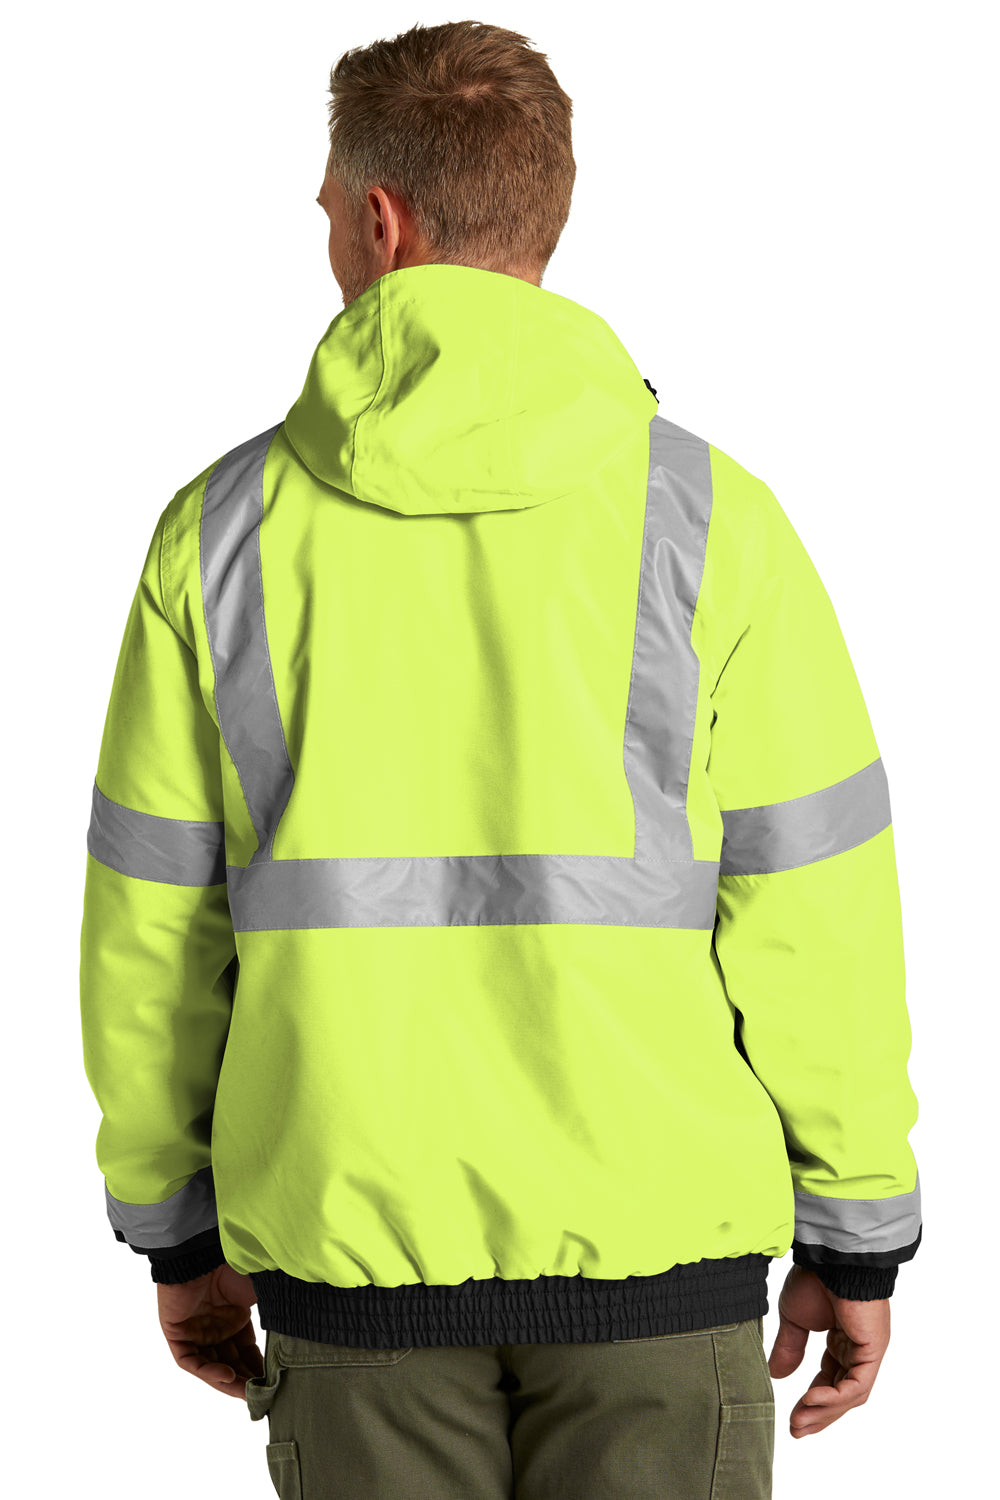 CornerStone CSJ500 Enhanced Visibility Insulated Full Zip Hooded Jacket Safety Yellow Back